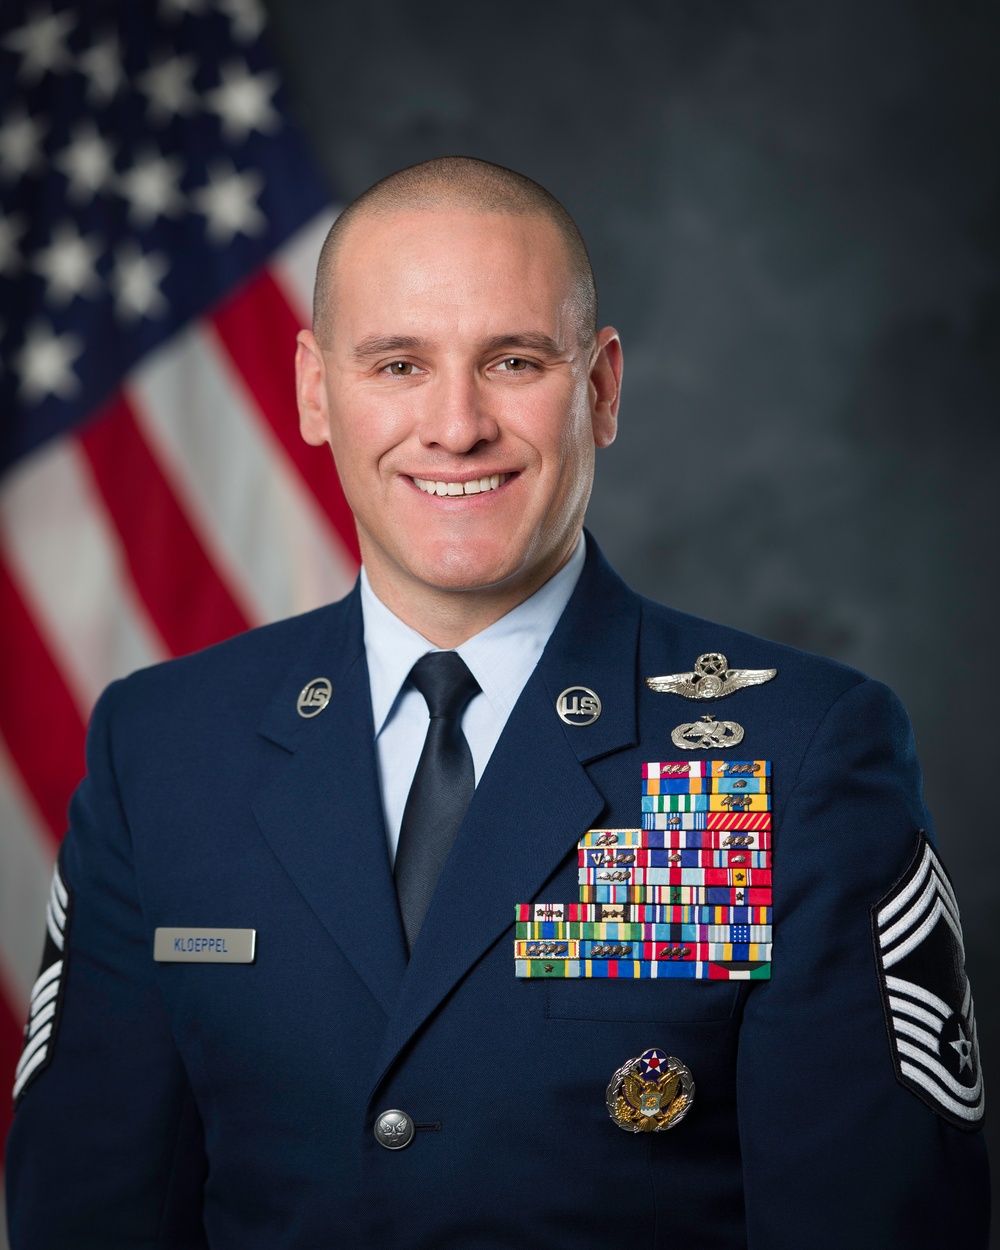 Official portrait of Joint Base Anacostia-Bolling Senior Enlisted Leader Chief Master Sgt. Kevin P. Kloeppel, US Air Force